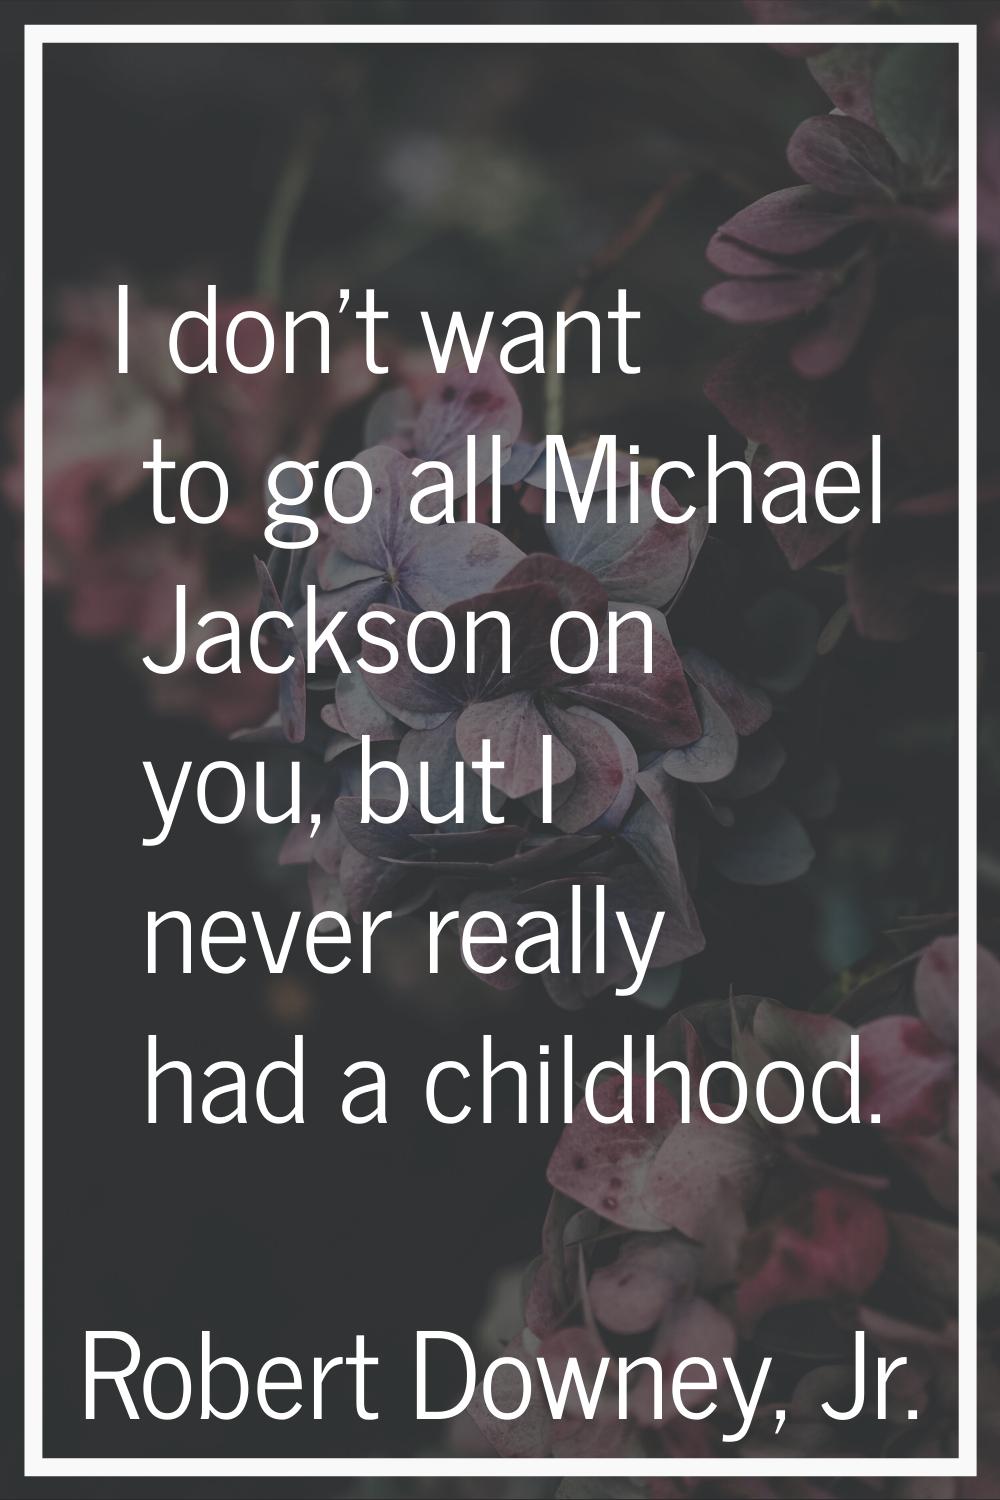 I don't want to go all Michael Jackson on you, but I never really had a childhood.